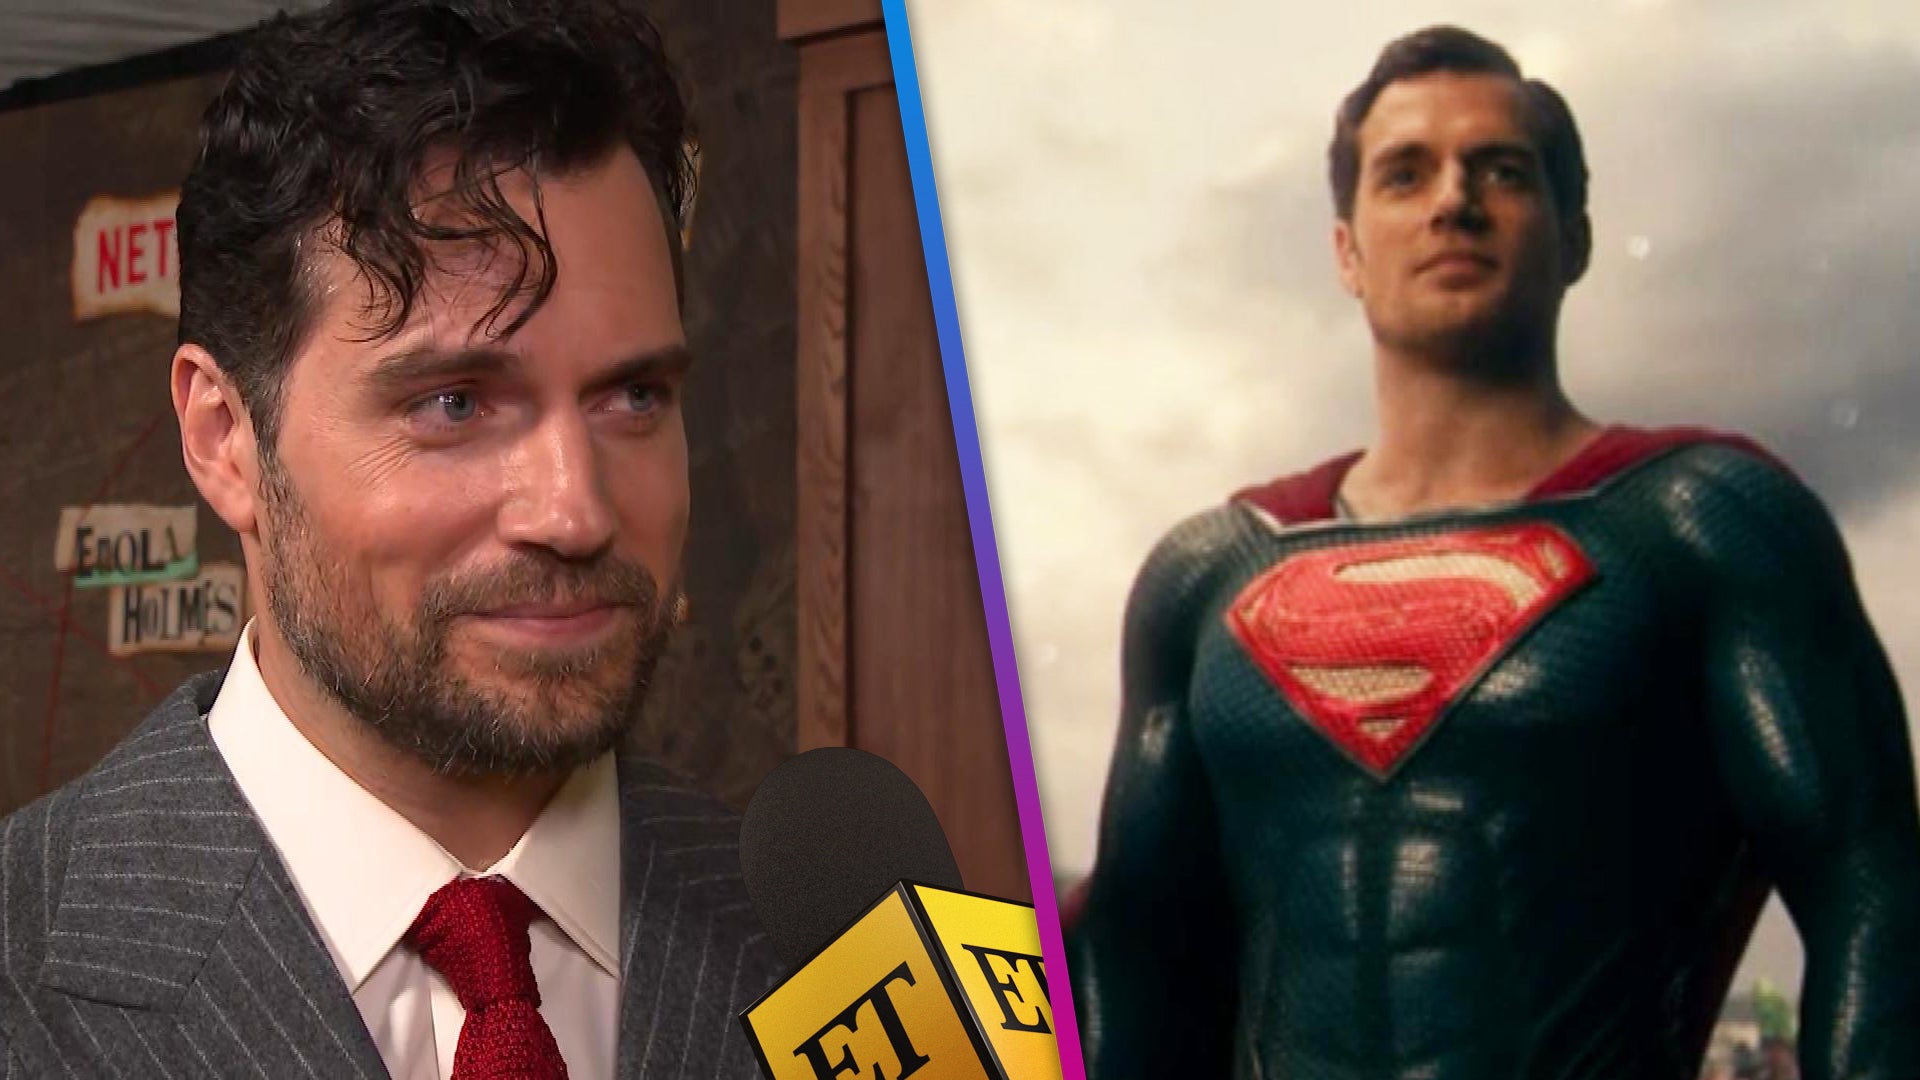 Henry Cavill on returning to play Superman